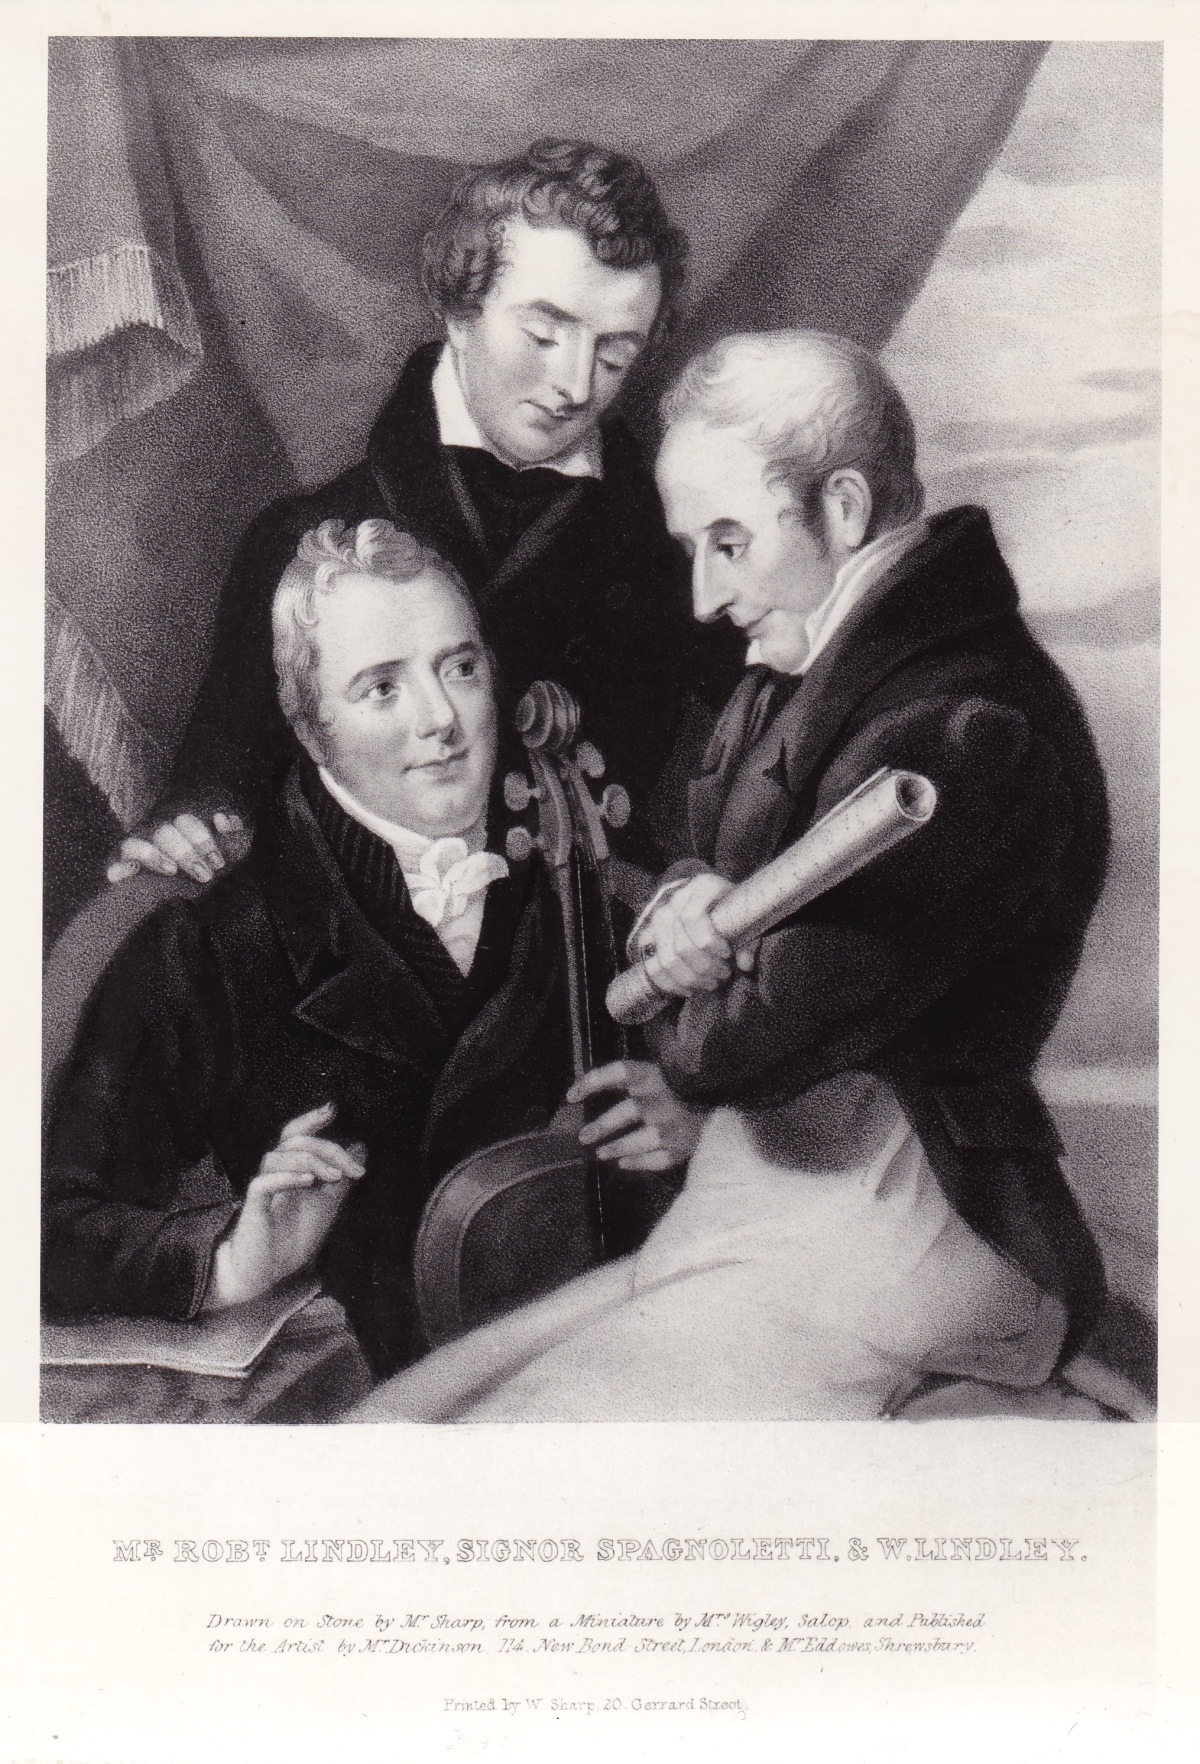 Paolo Spagnoletti (at right), with Robert Lindley (cello) and his son William Lindley (standing)